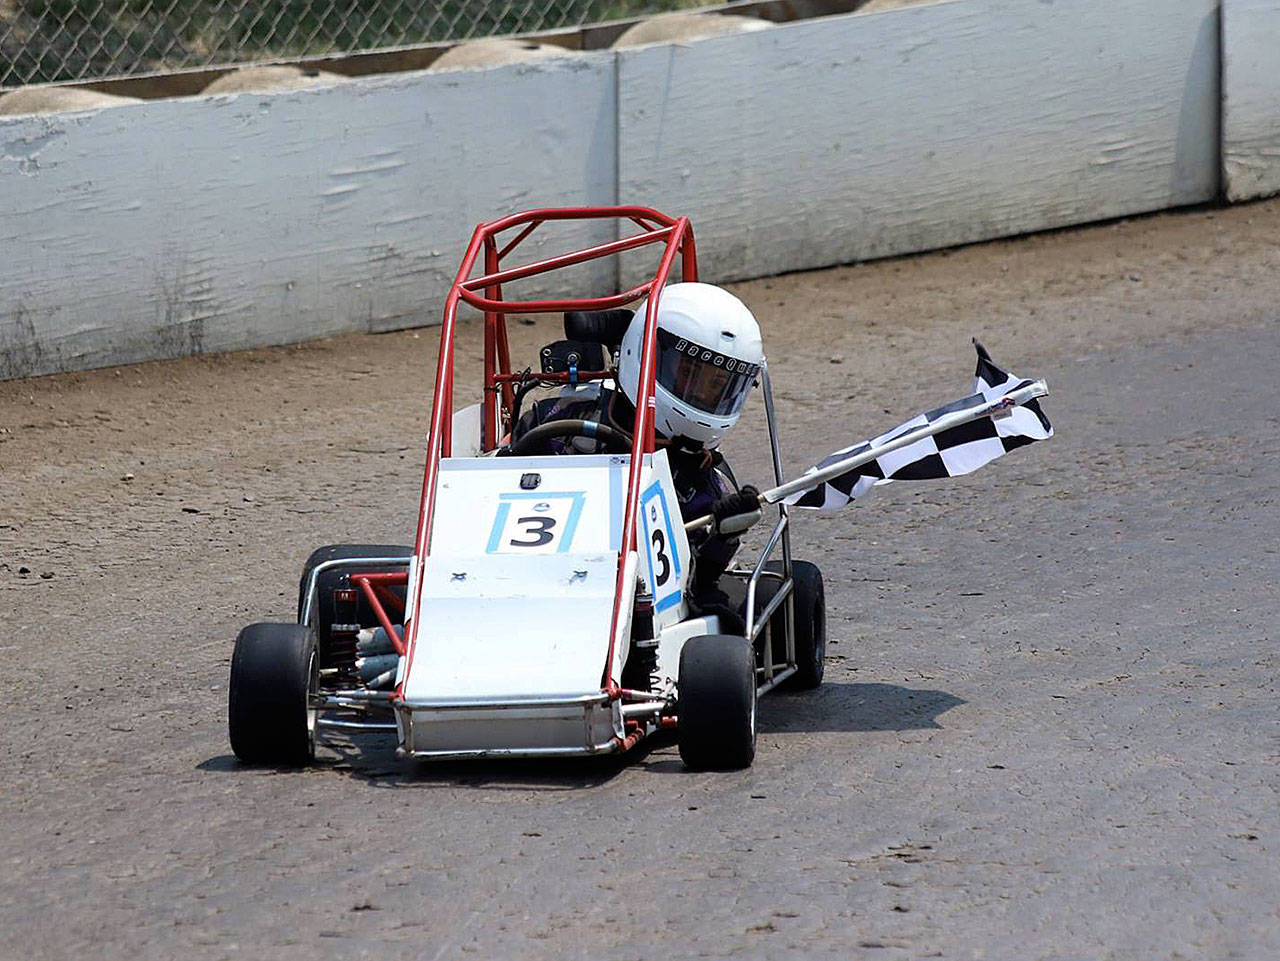 Grayden Youmans celebrates with the checkered flag after winning the Senior Novice event at the QMA Dirt Grand Nationals in California. (Photo by Steve Youmans)